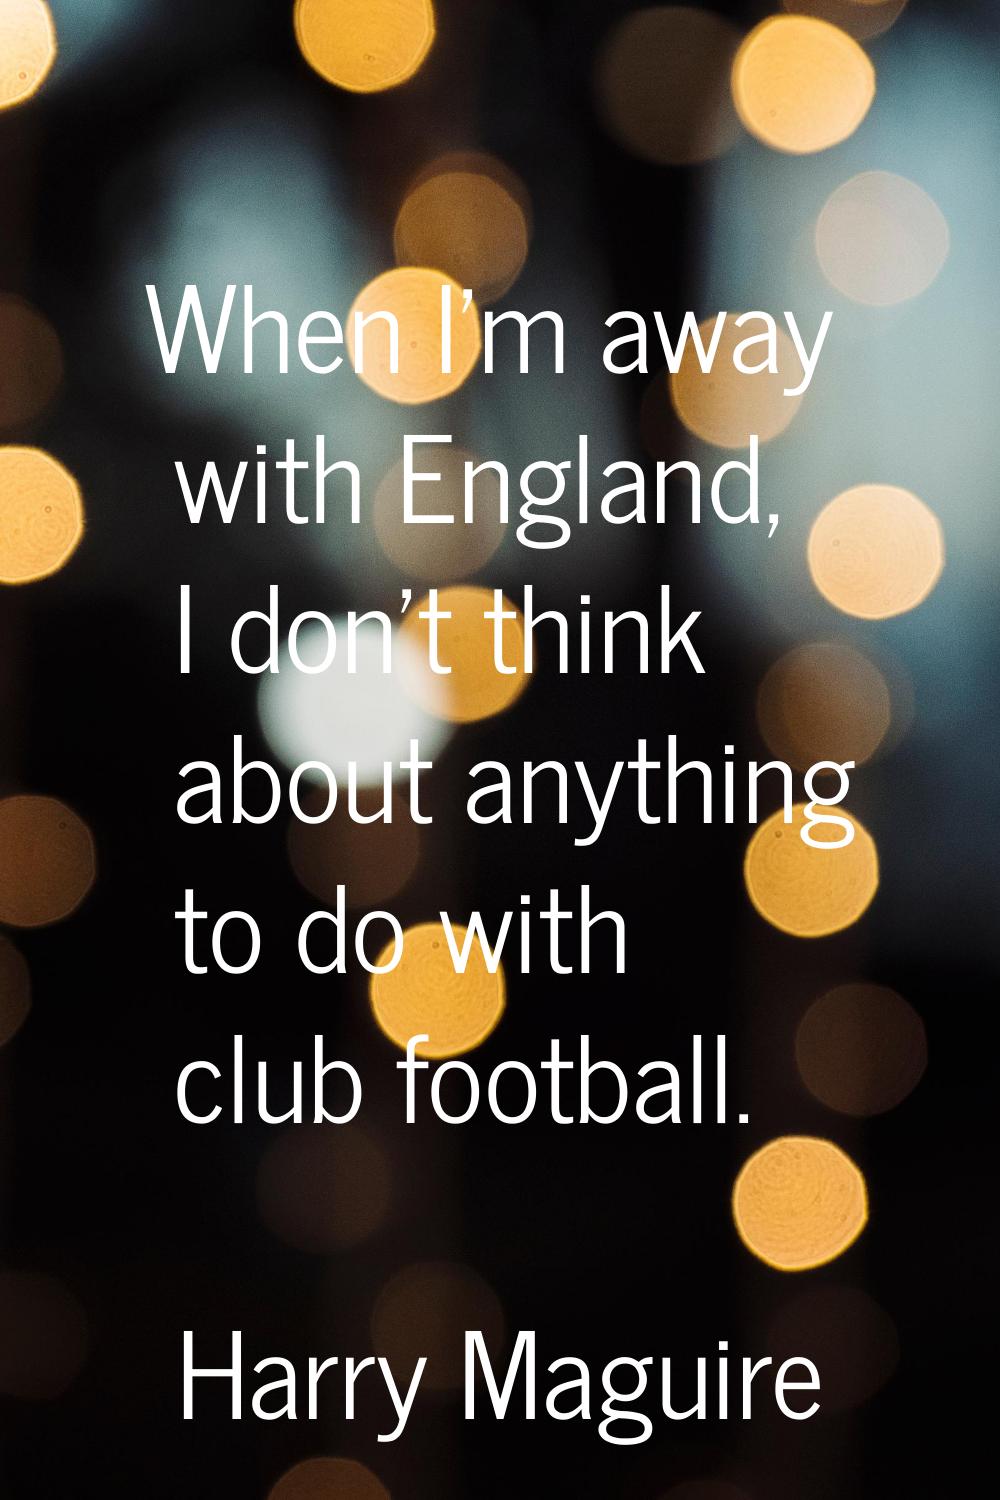 When I'm away with England, I don't think about anything to do with club football.